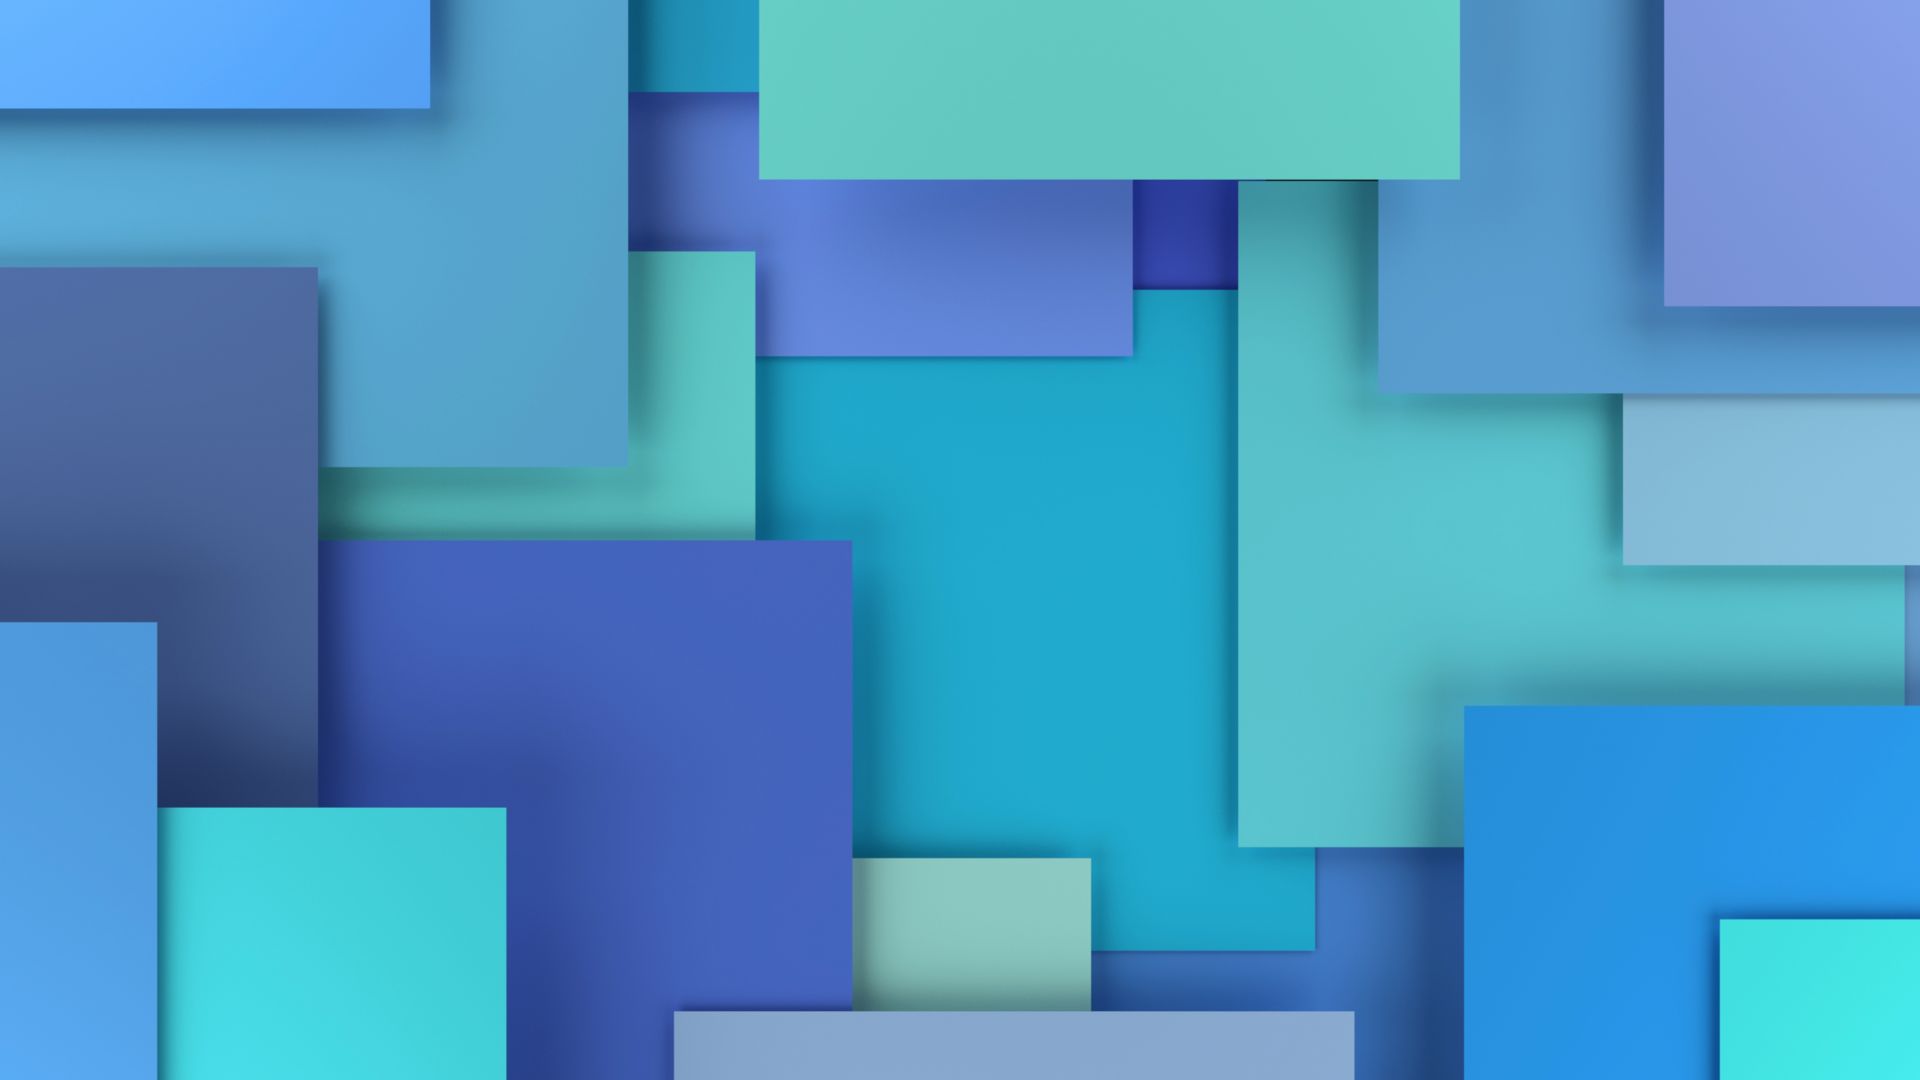 Wallpaper Material design, abstract, squares